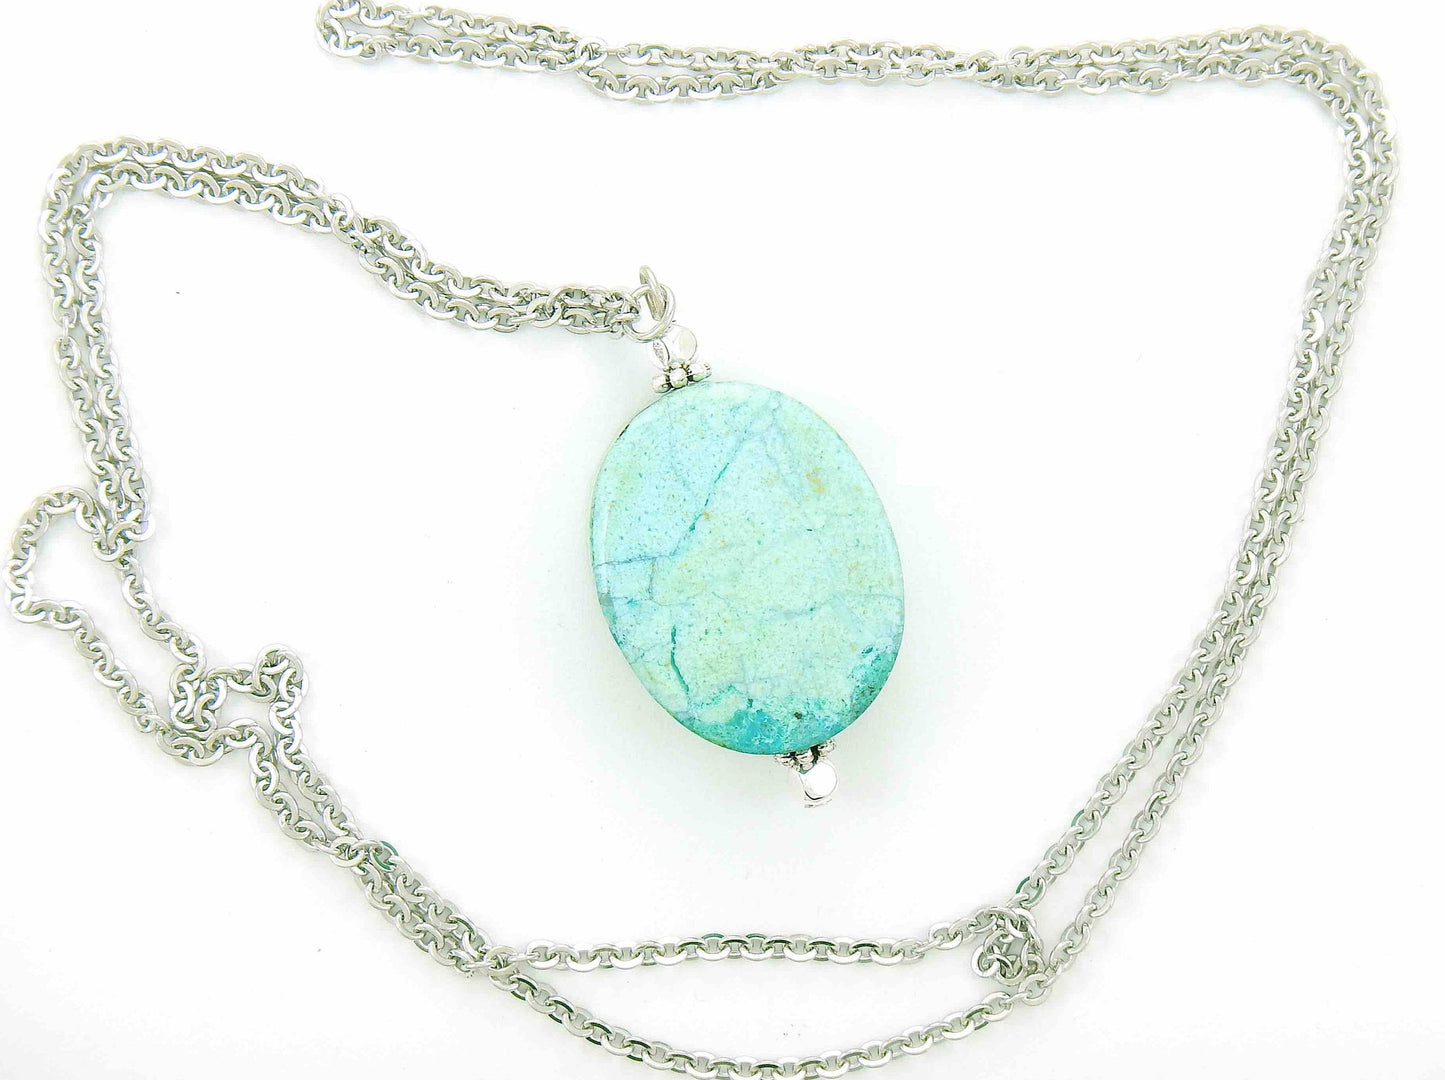 30-inch necklace with large blue-green marbled chrysocolla stone slice, stainless steel chain